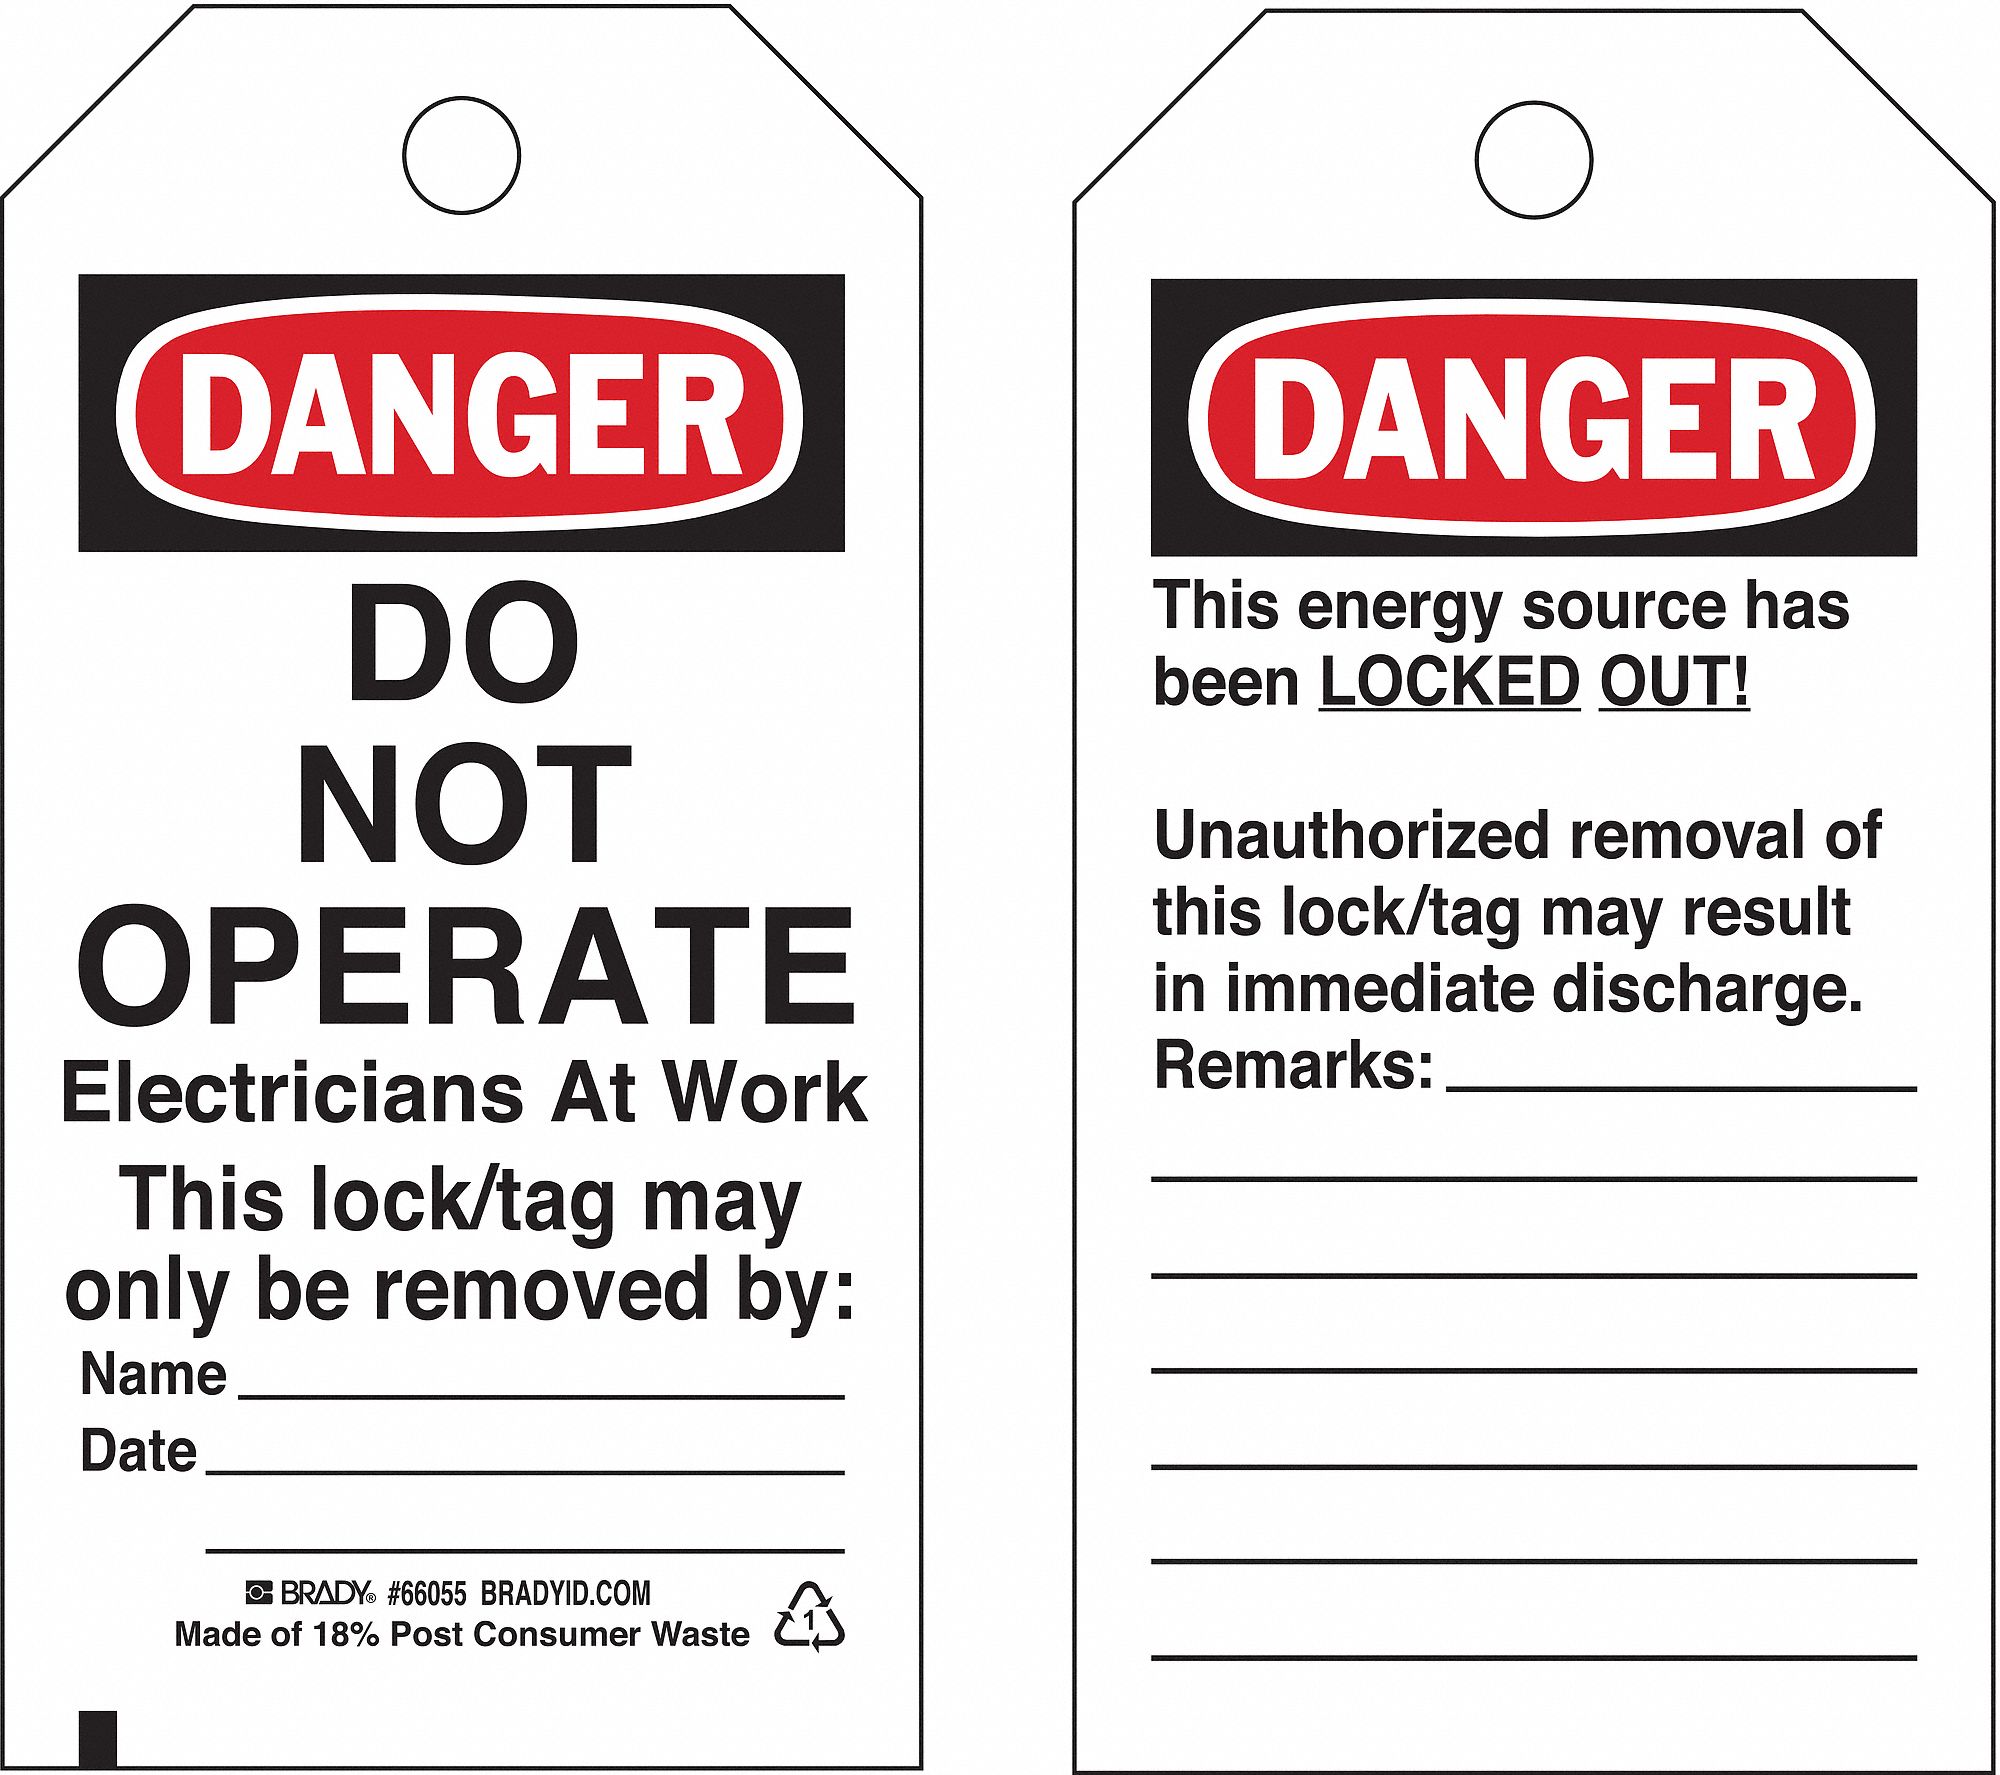 Laminated PolyesterDo Not Operate Electricians At Work This Lock/Tag May Only Be Removed By